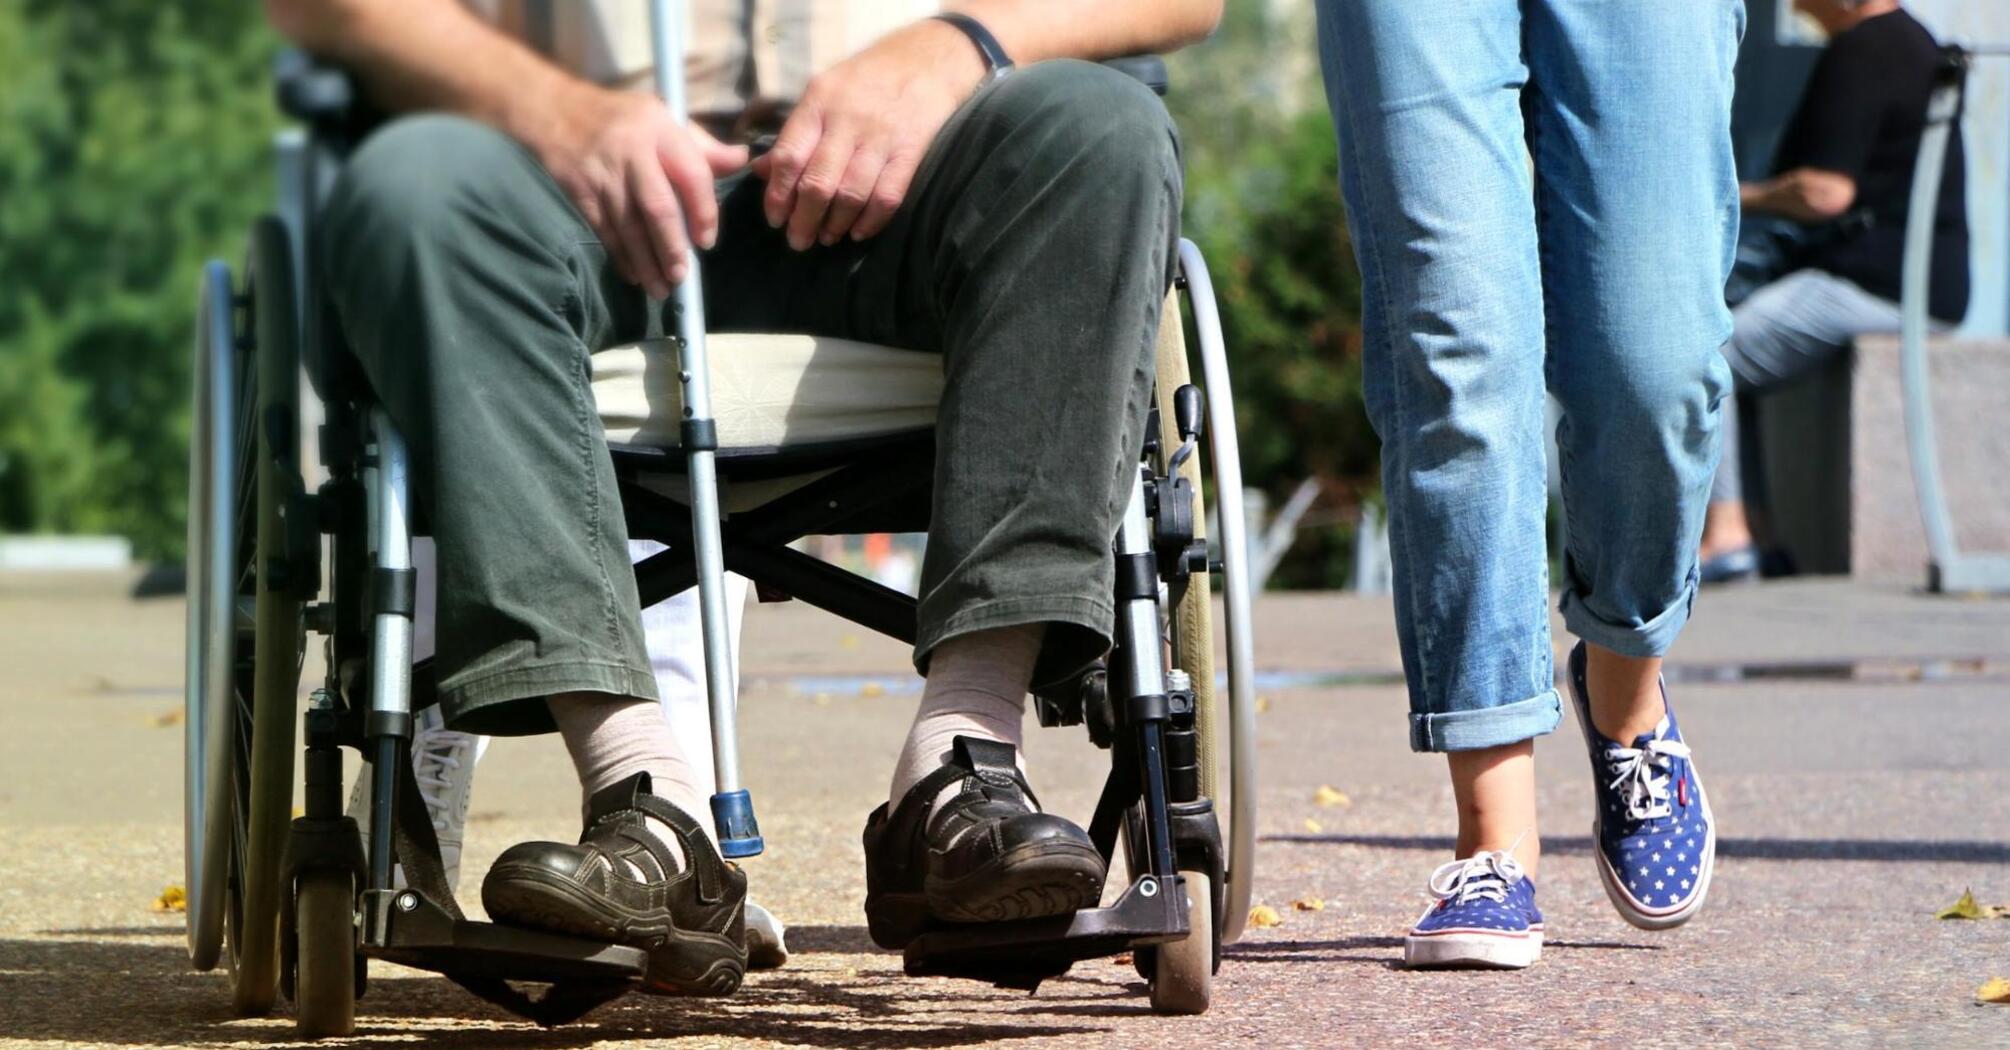 Elderly person in a wheelchair and accompanying person walking